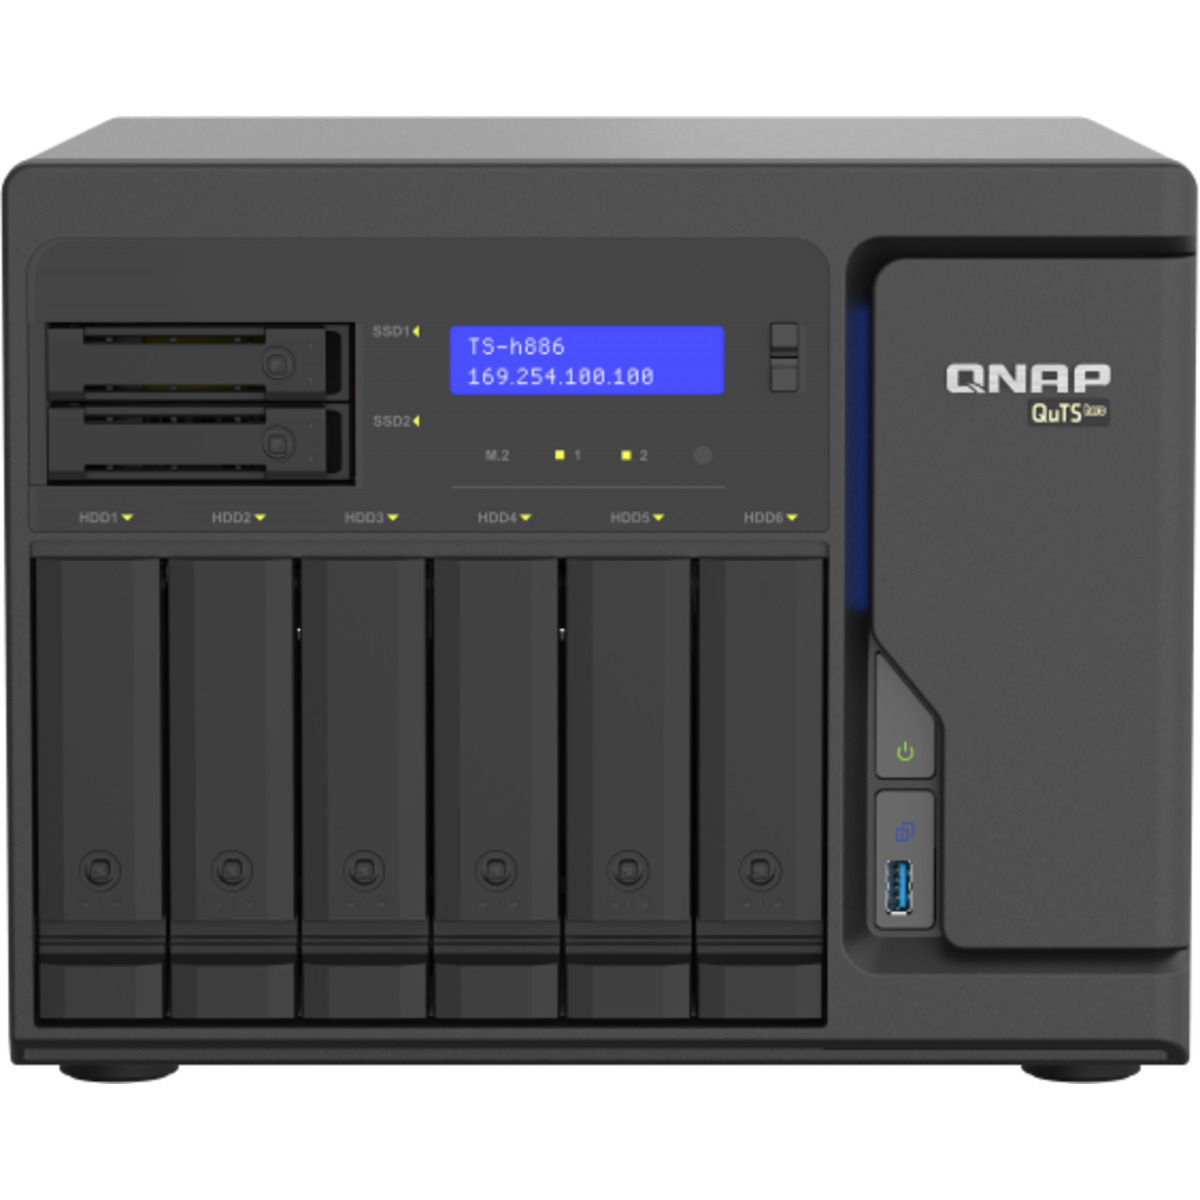 QNAP TS-h886 QuTS hero NAS 72tb 6+2-Bay Desktop Large Business / Enterprise NAS - Network Attached Storage Device 3x24tb Seagate IronWolf Pro ST24000NT002 3.5 7200rpm SATA 6Gb/s HDD NAS Class Drives Installed - Burn-In Tested TS-h886 QuTS hero NAS